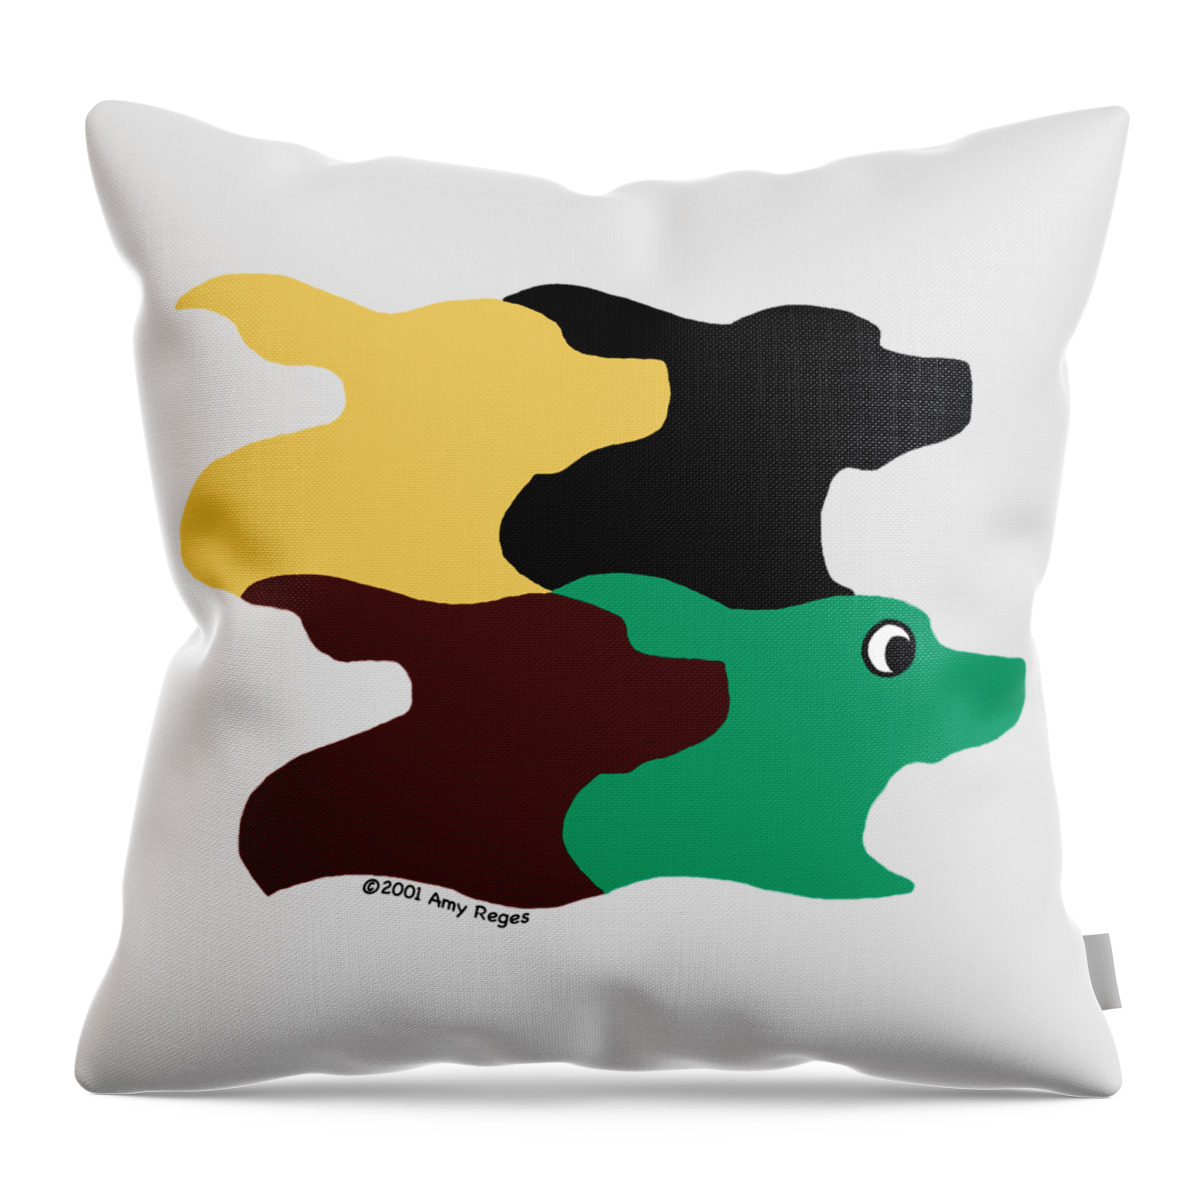 Dogs Throw Pillow featuring the painting Wild and Crazy Tessellating Dogs by Amy Reges